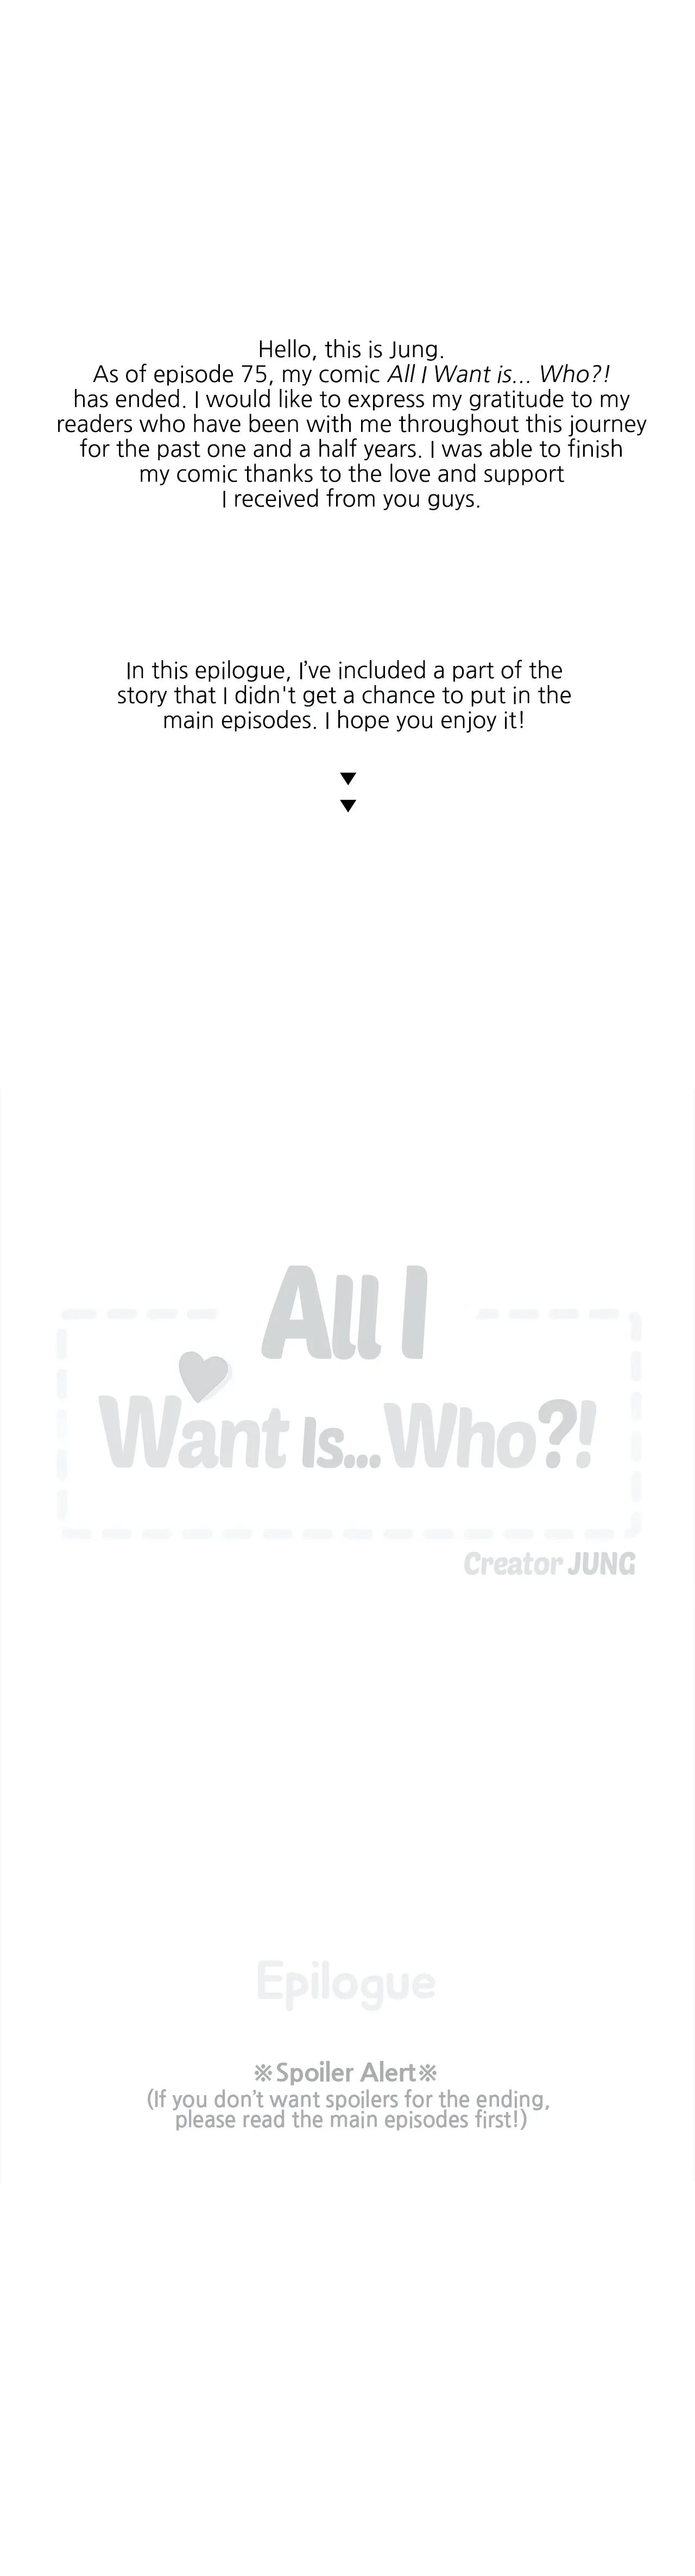 All I Want Is… Who! image